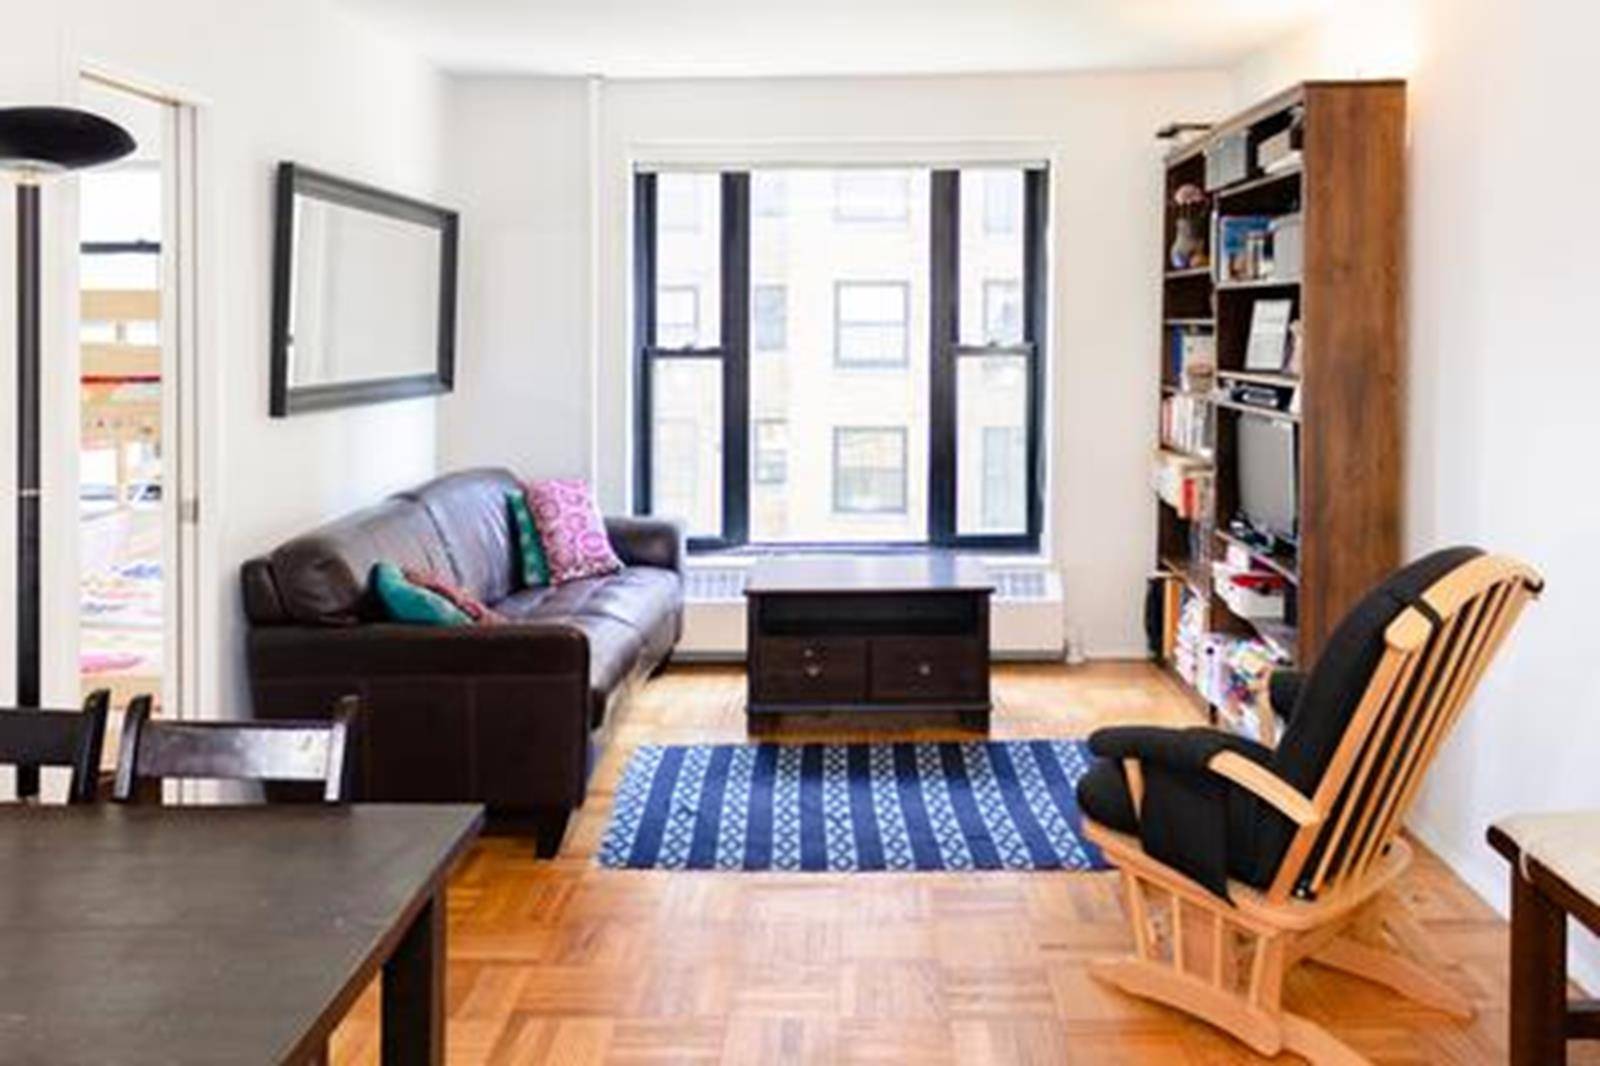 2 bedroom in Clinton Hill Co opsThis large, junior 2 bedroom on the South Campus of the Clinton Hill Co ops boasts six windows, affording ample light, as well as ...